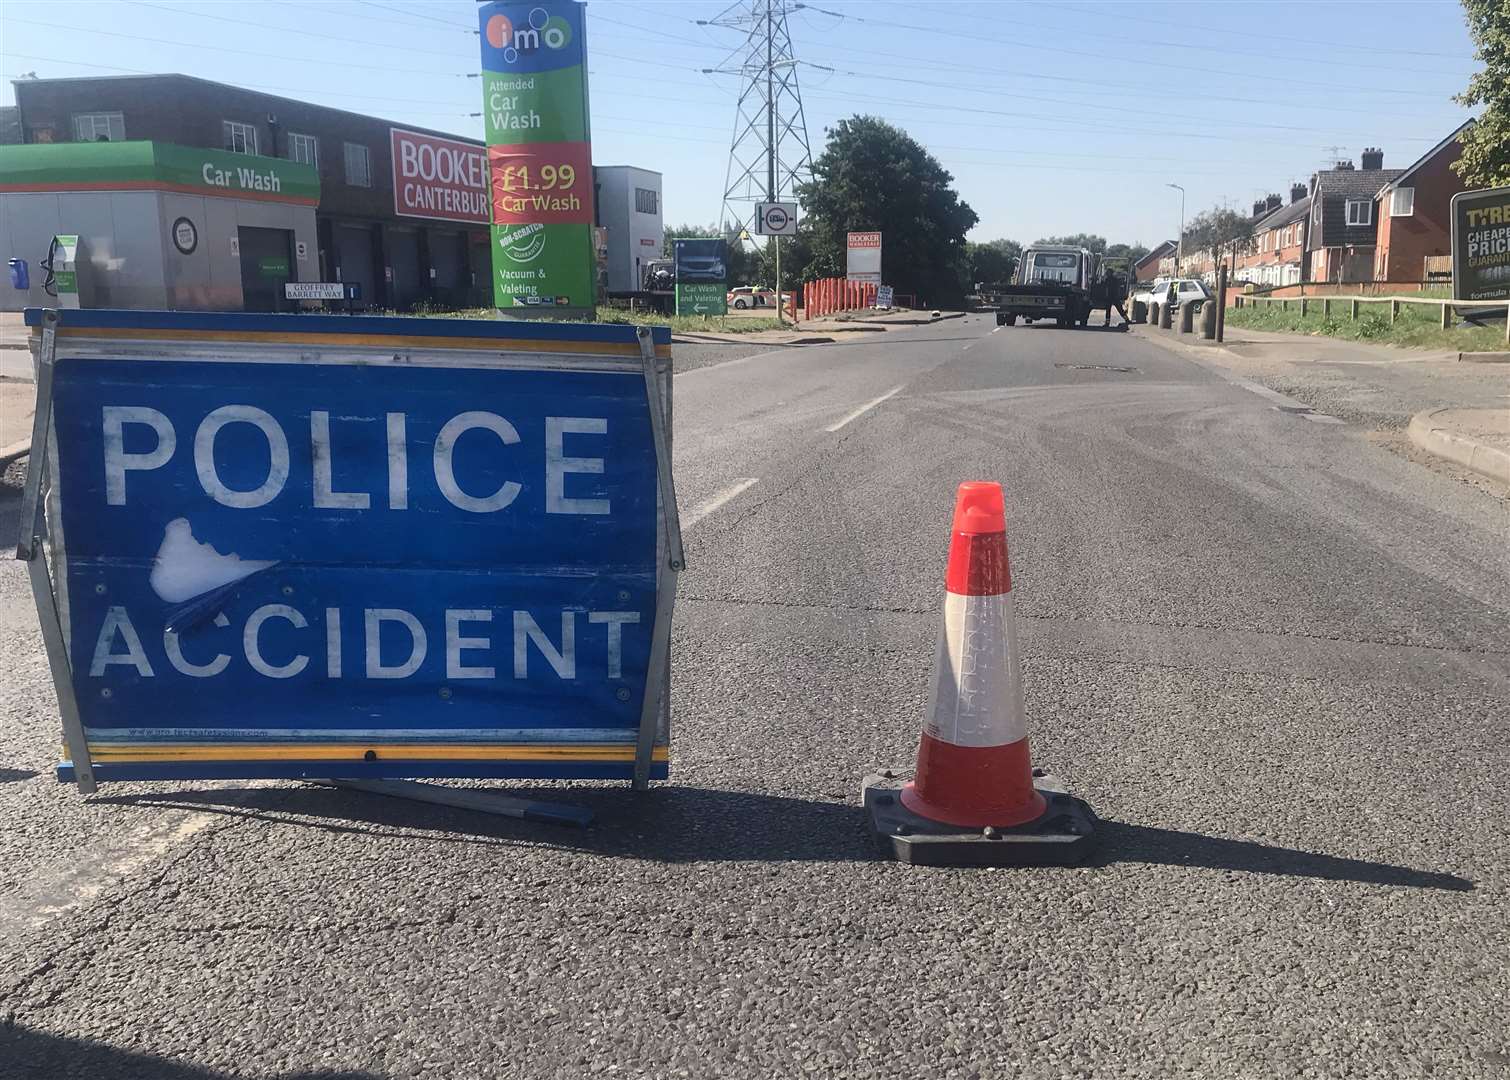 The road was closed by police for about nine hours